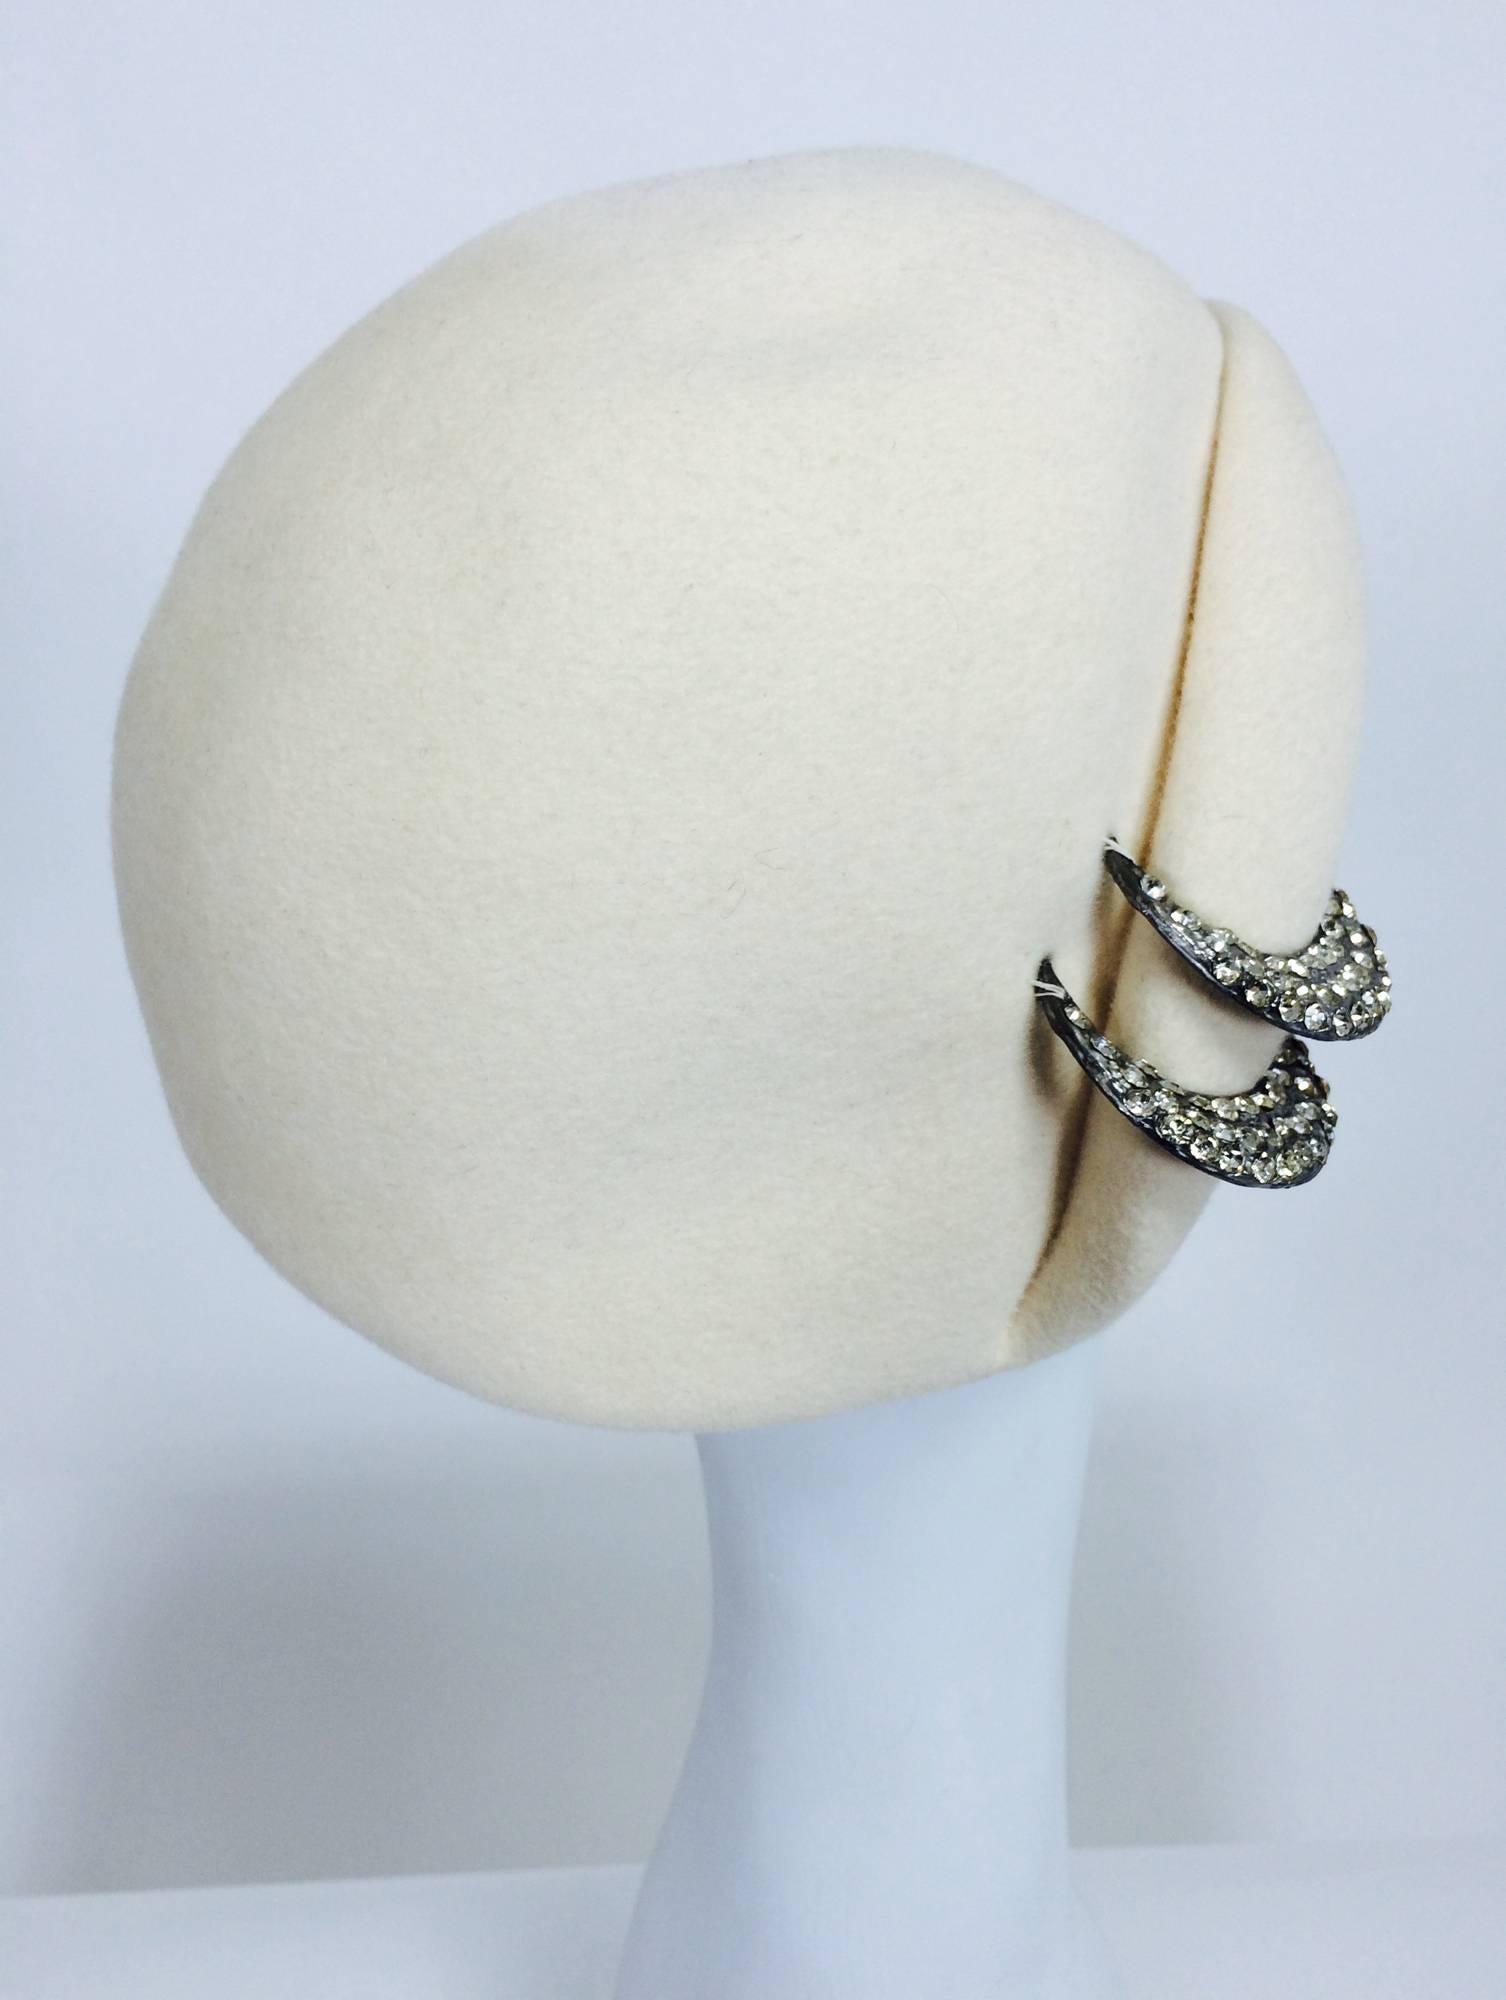 From the 1960s a cream wool cocktail hat with rhinestone trim...side rolled brim...fabric is marked Halson...Labeled Halston....

Measurements are:
21 1/4